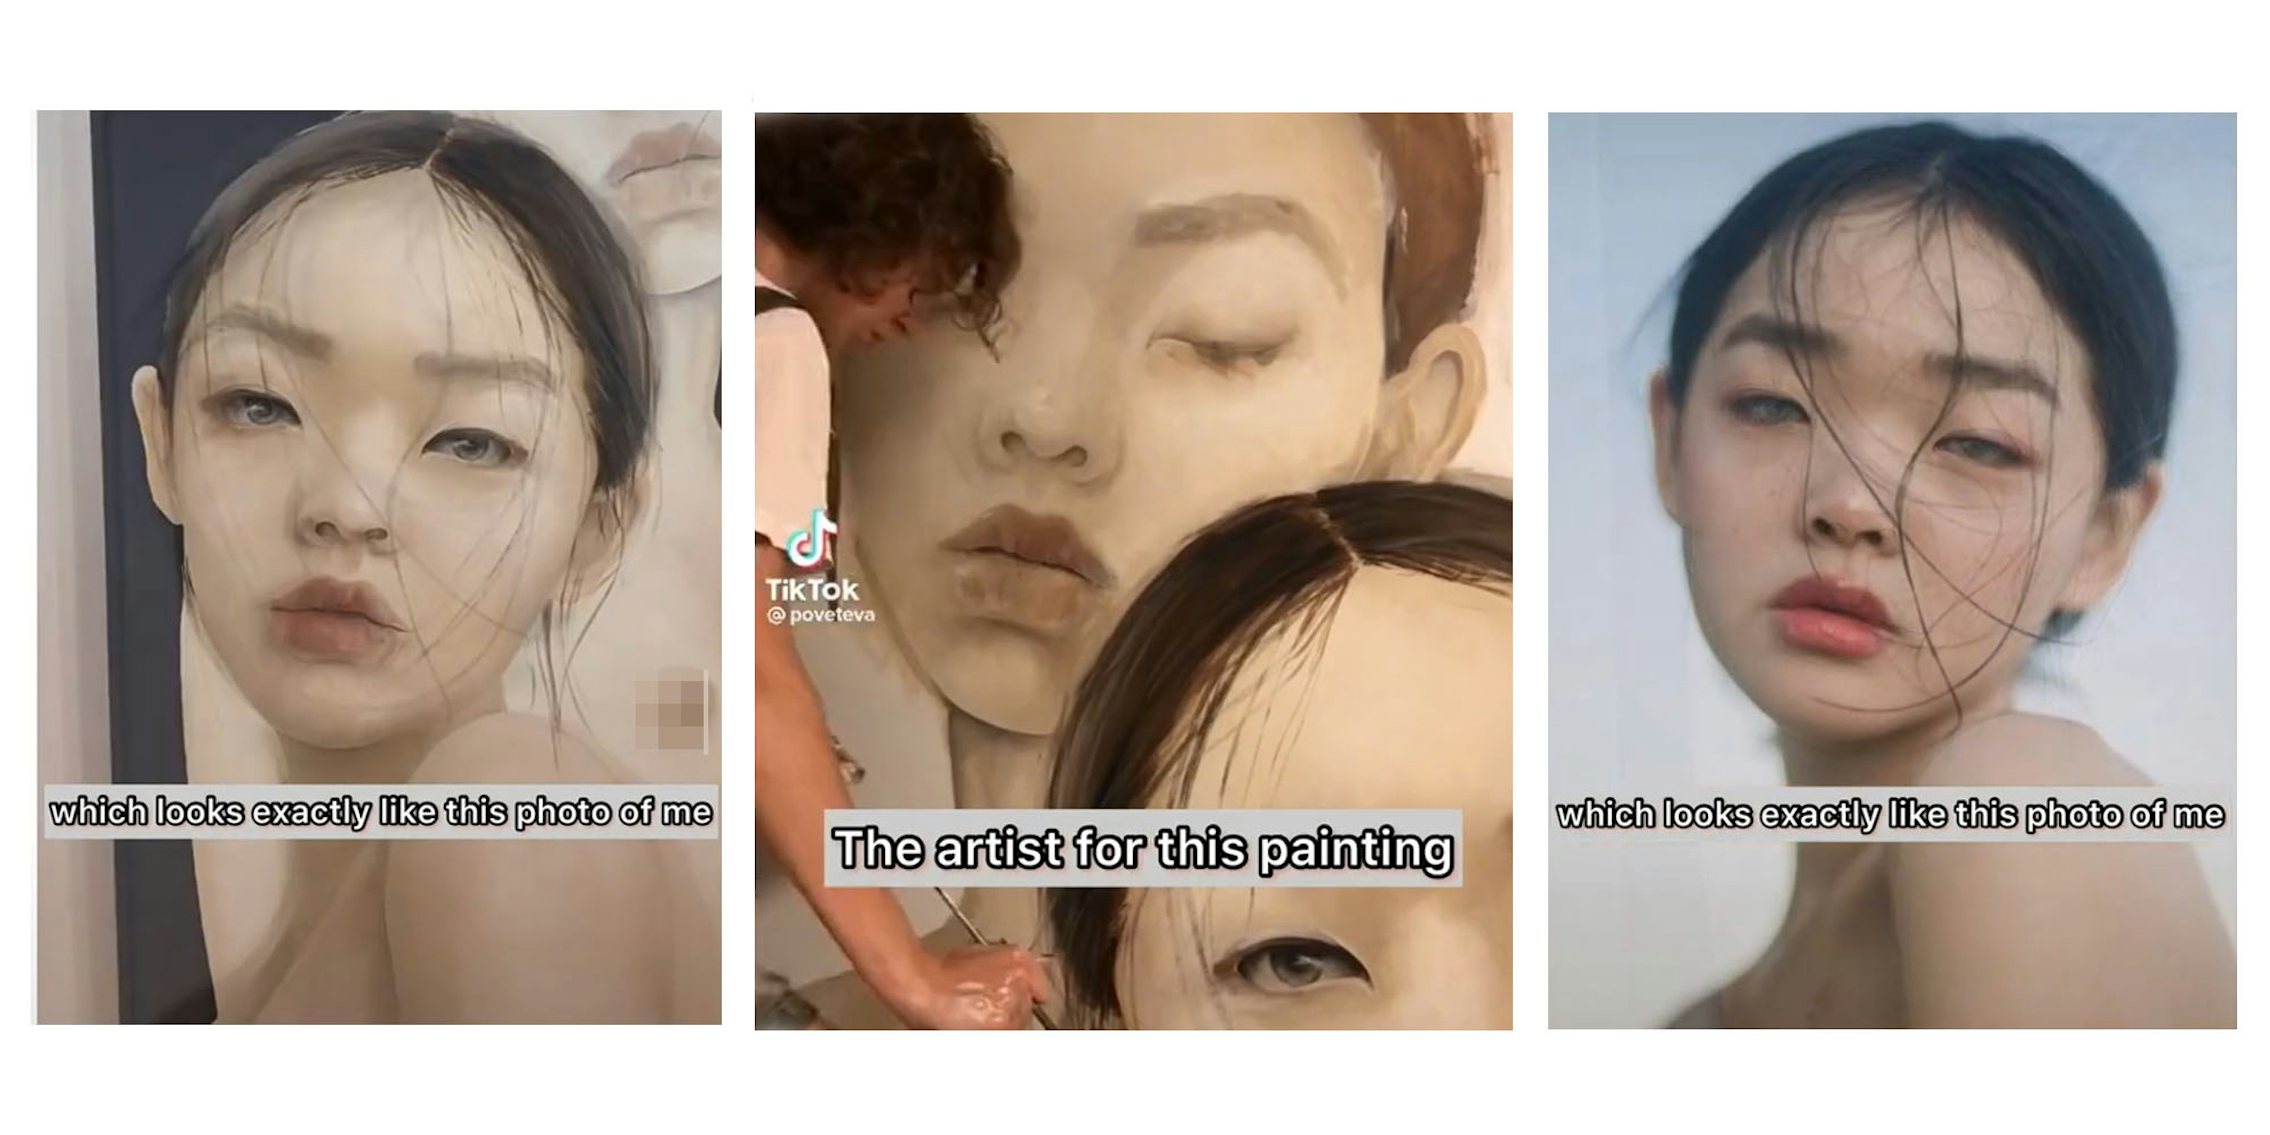 Painting of naked women with caption 'which looks exactly like me' (l) Angelina Poveteva painting with caption 'The artist for this painting' (c) Photo of woman caption 'which looks exactly like this photo of me' (r)